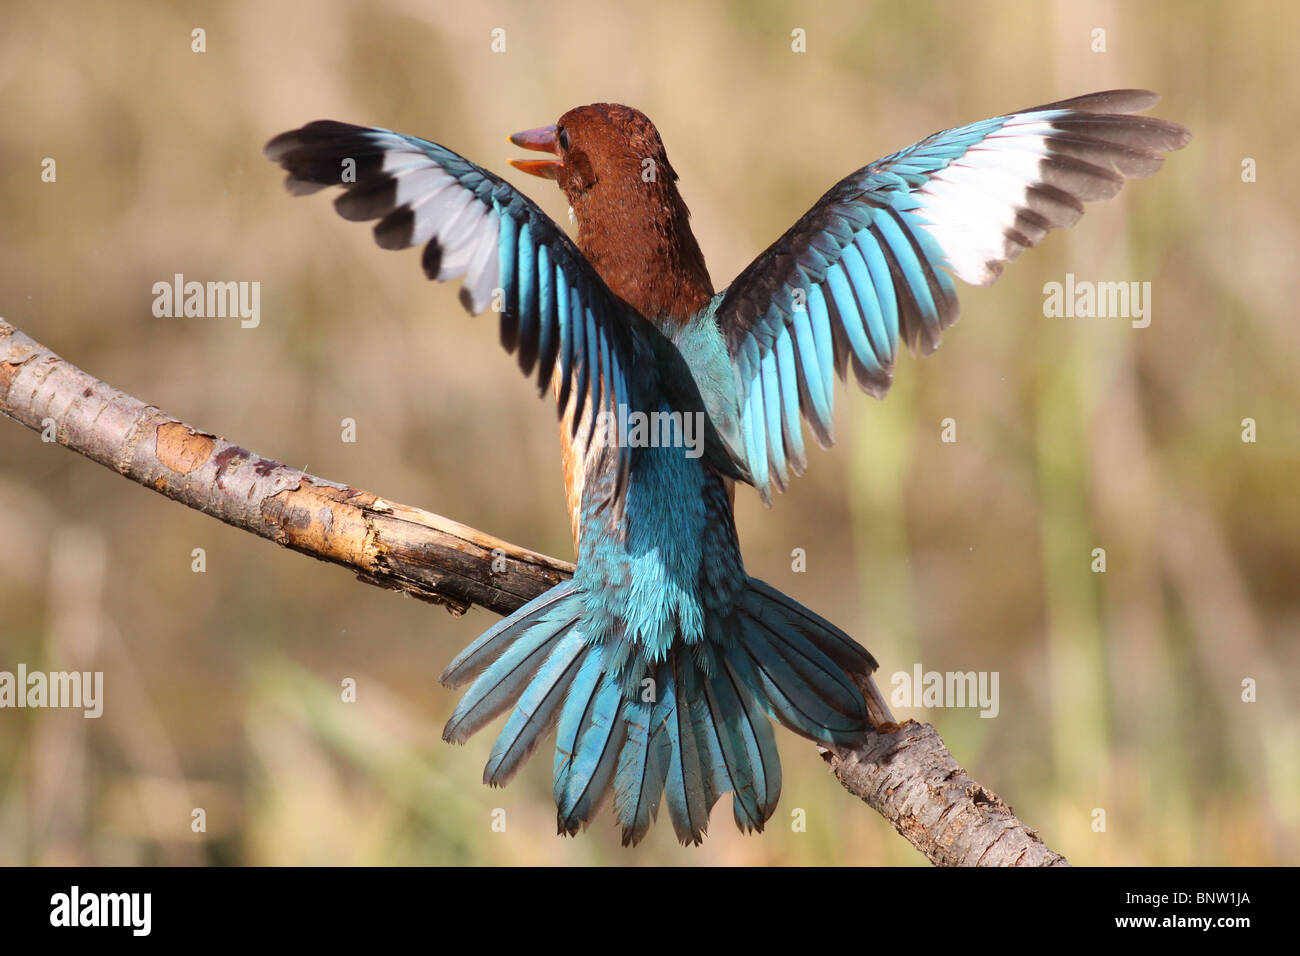 White-throated Kingfisher, Halcyon smyrnensis, also known as the White-breasted Kingfisher or Smyrna Kingfisher Stock Photo